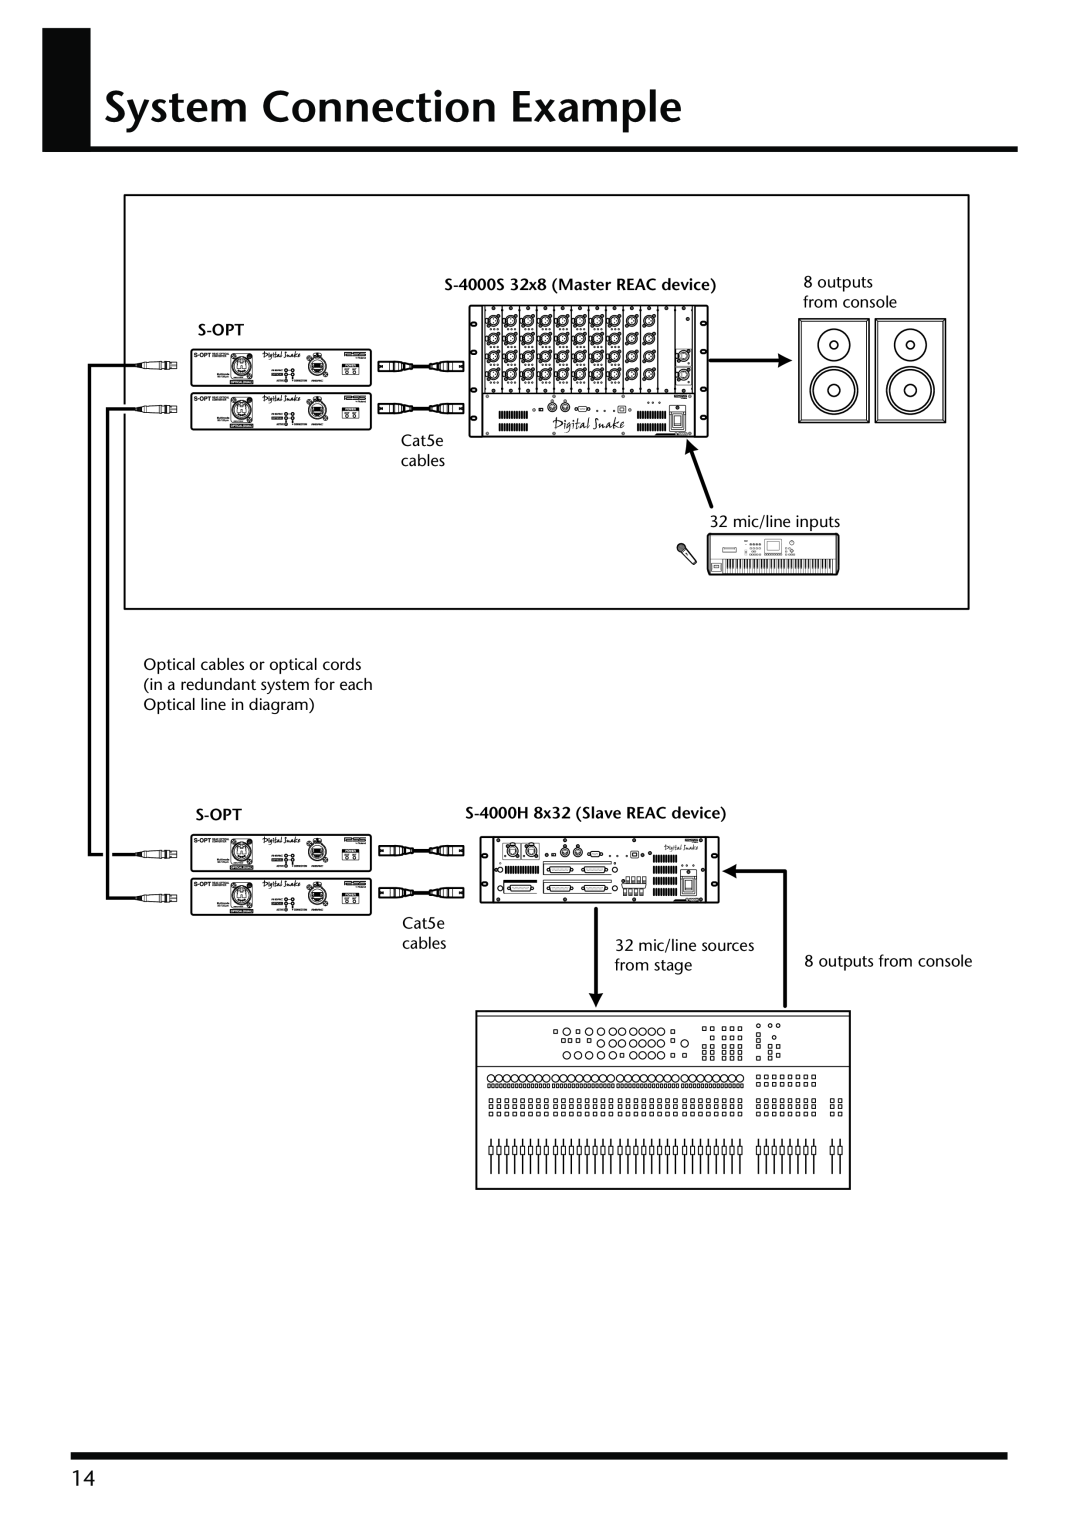 Roland S-OPT owner manual System Connection Example, S-4000S32x8 Master REAC device, S-Opt 